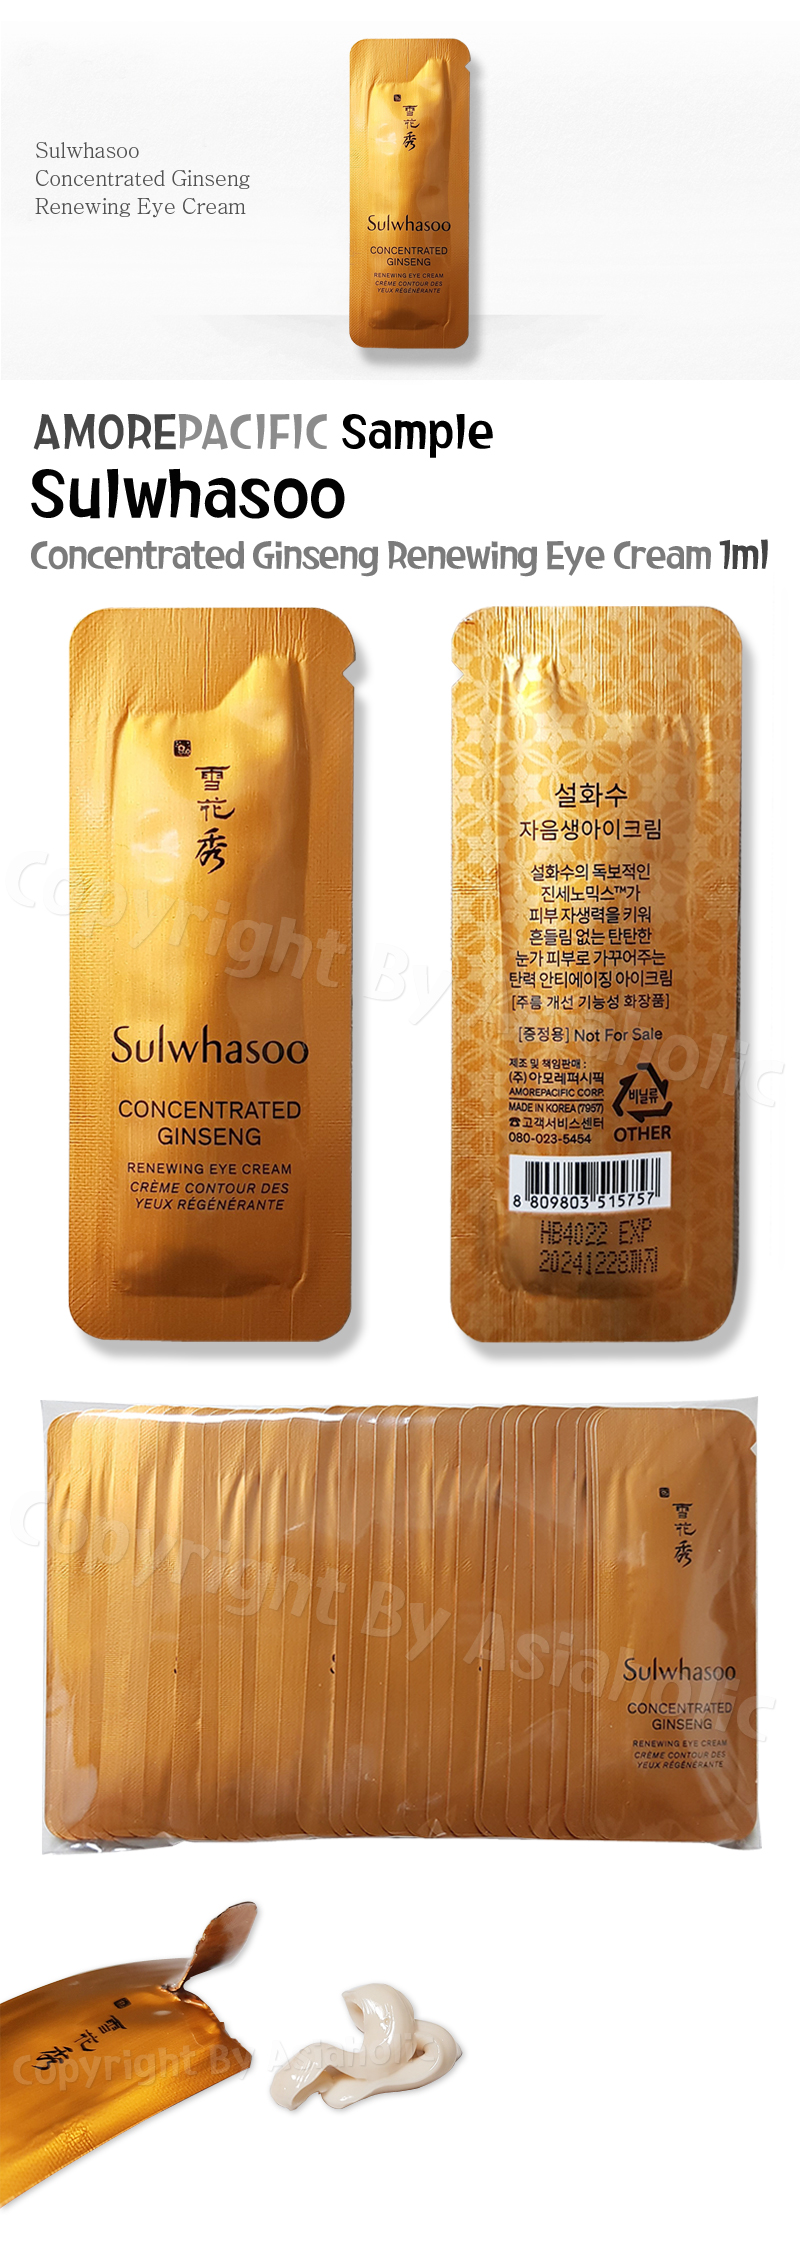 Sulwhasoo Concentrated Ginseng Renewing Eye Cream 1ml x 60pcs (60ml) Newest Version